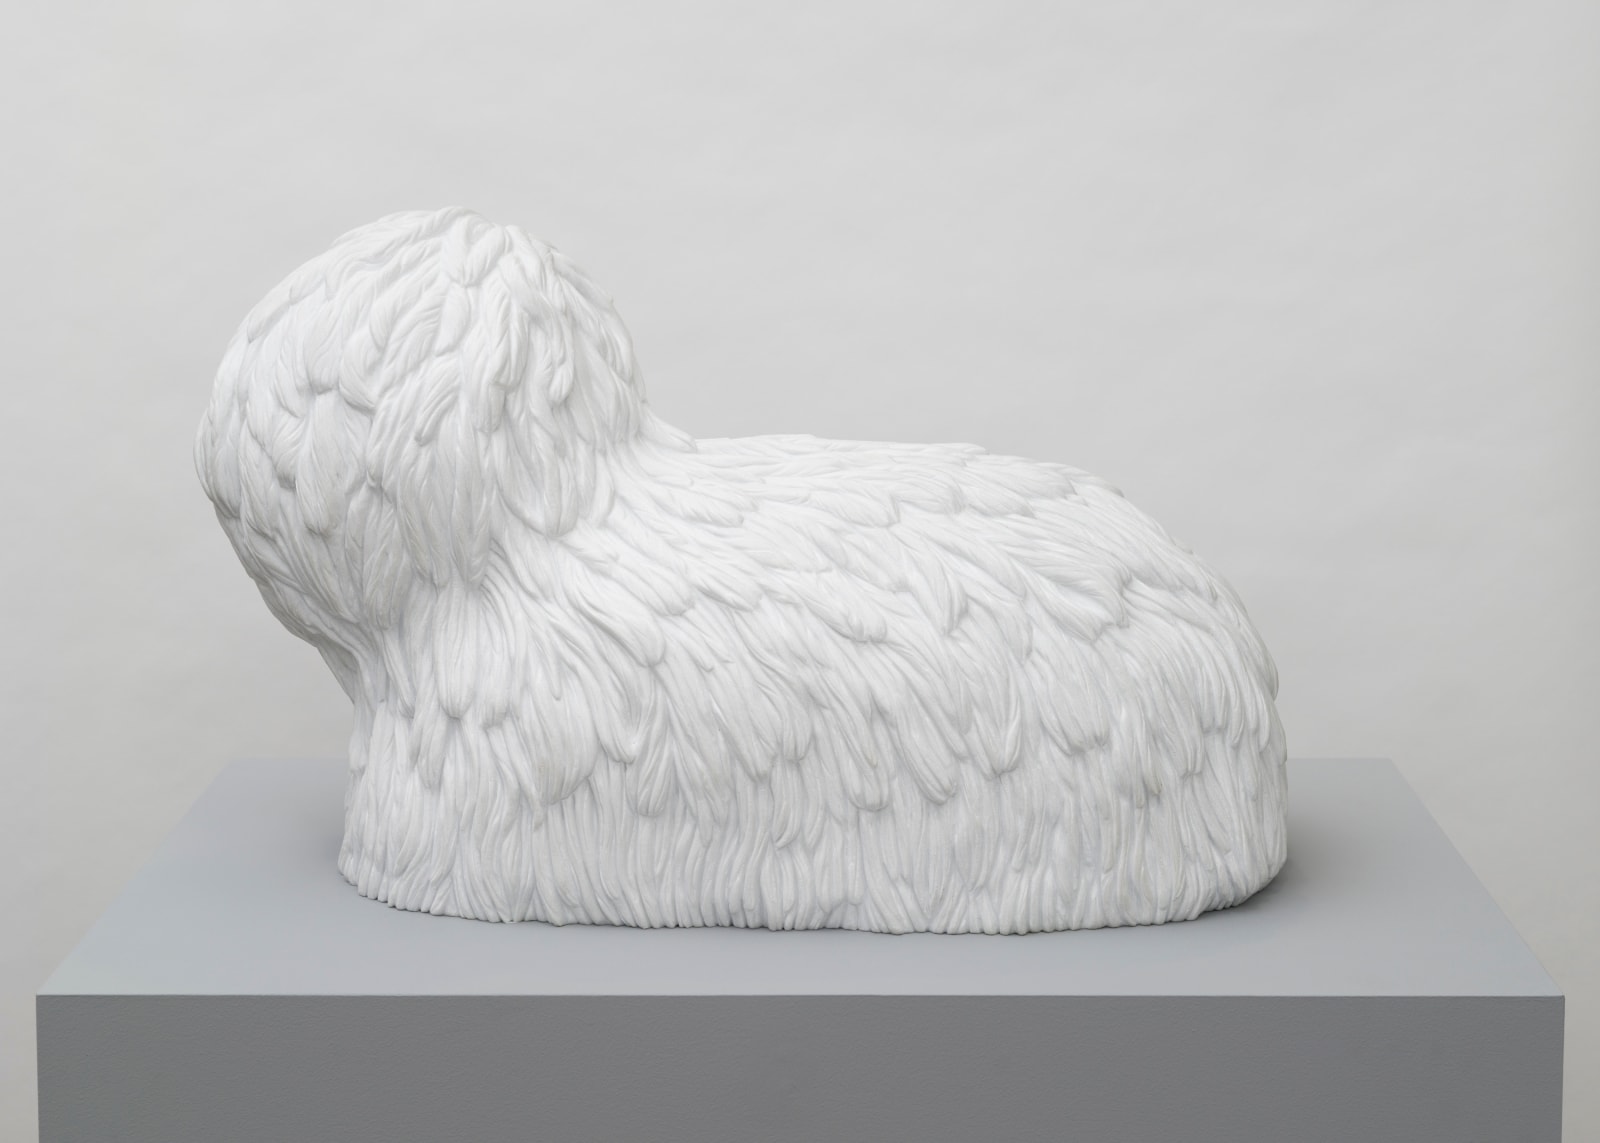 Free-standing, white marble sculpture in the form of a poodle-like creature whose entire surface is carved to give it fur-like texture.